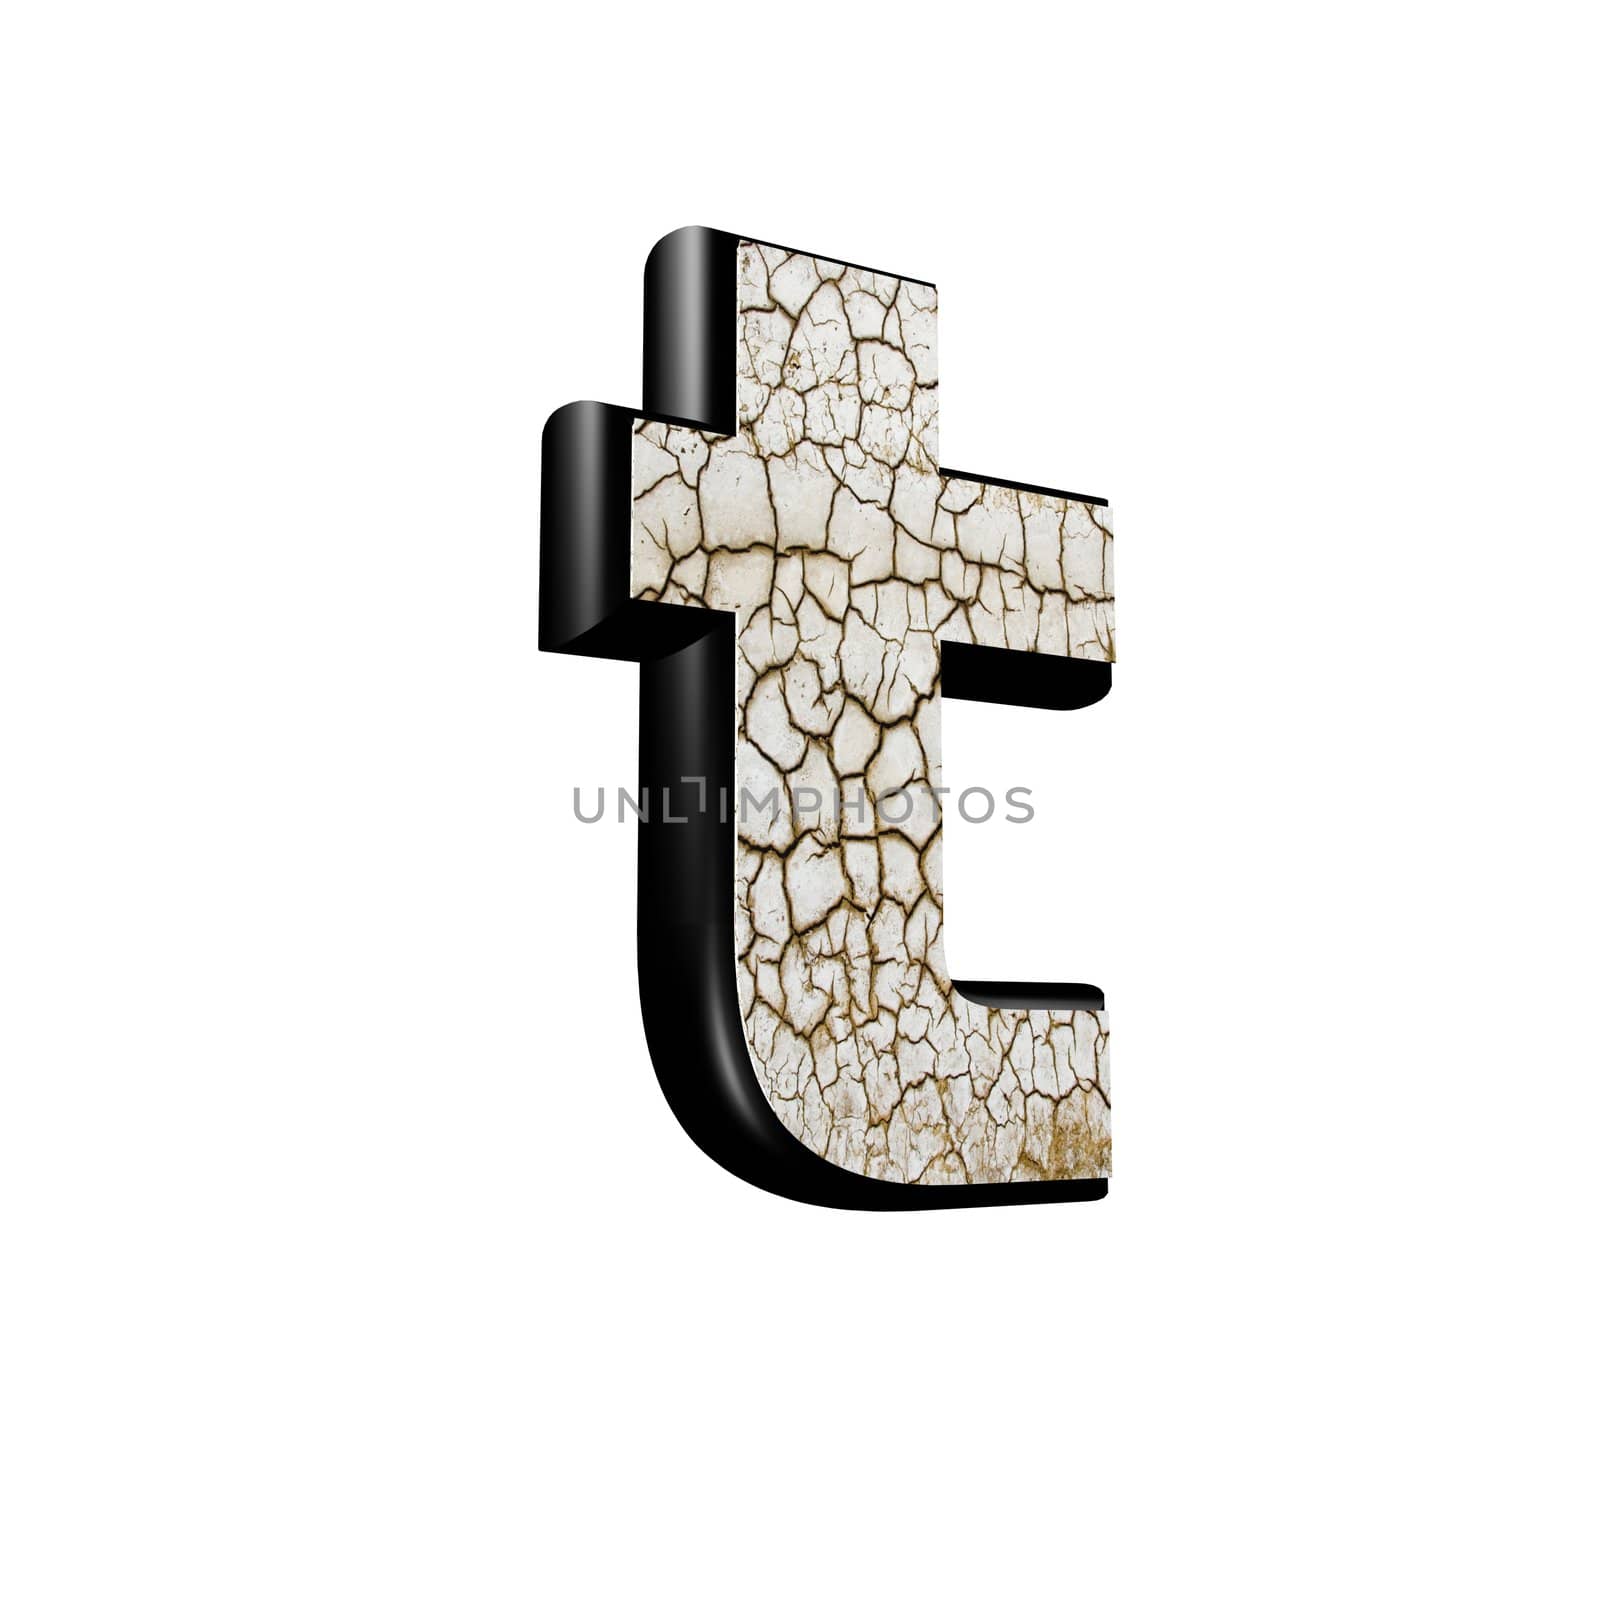 abstract 3d letter with dry ground texture - T by chrisroll